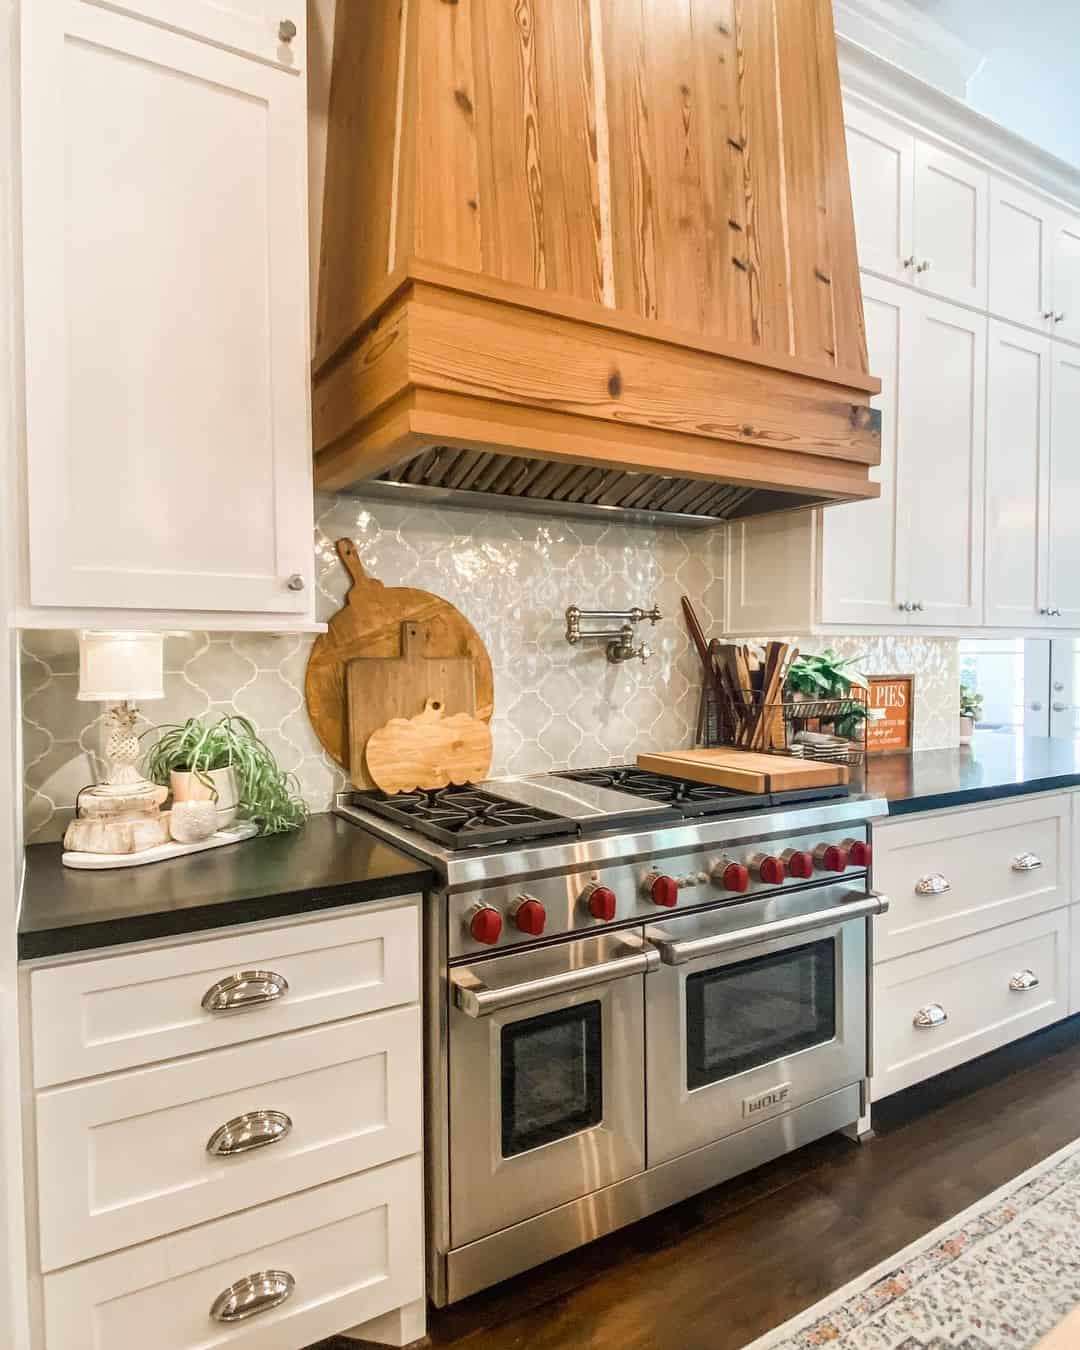 Should a Range Hood Be Wider Than a Cooktop?